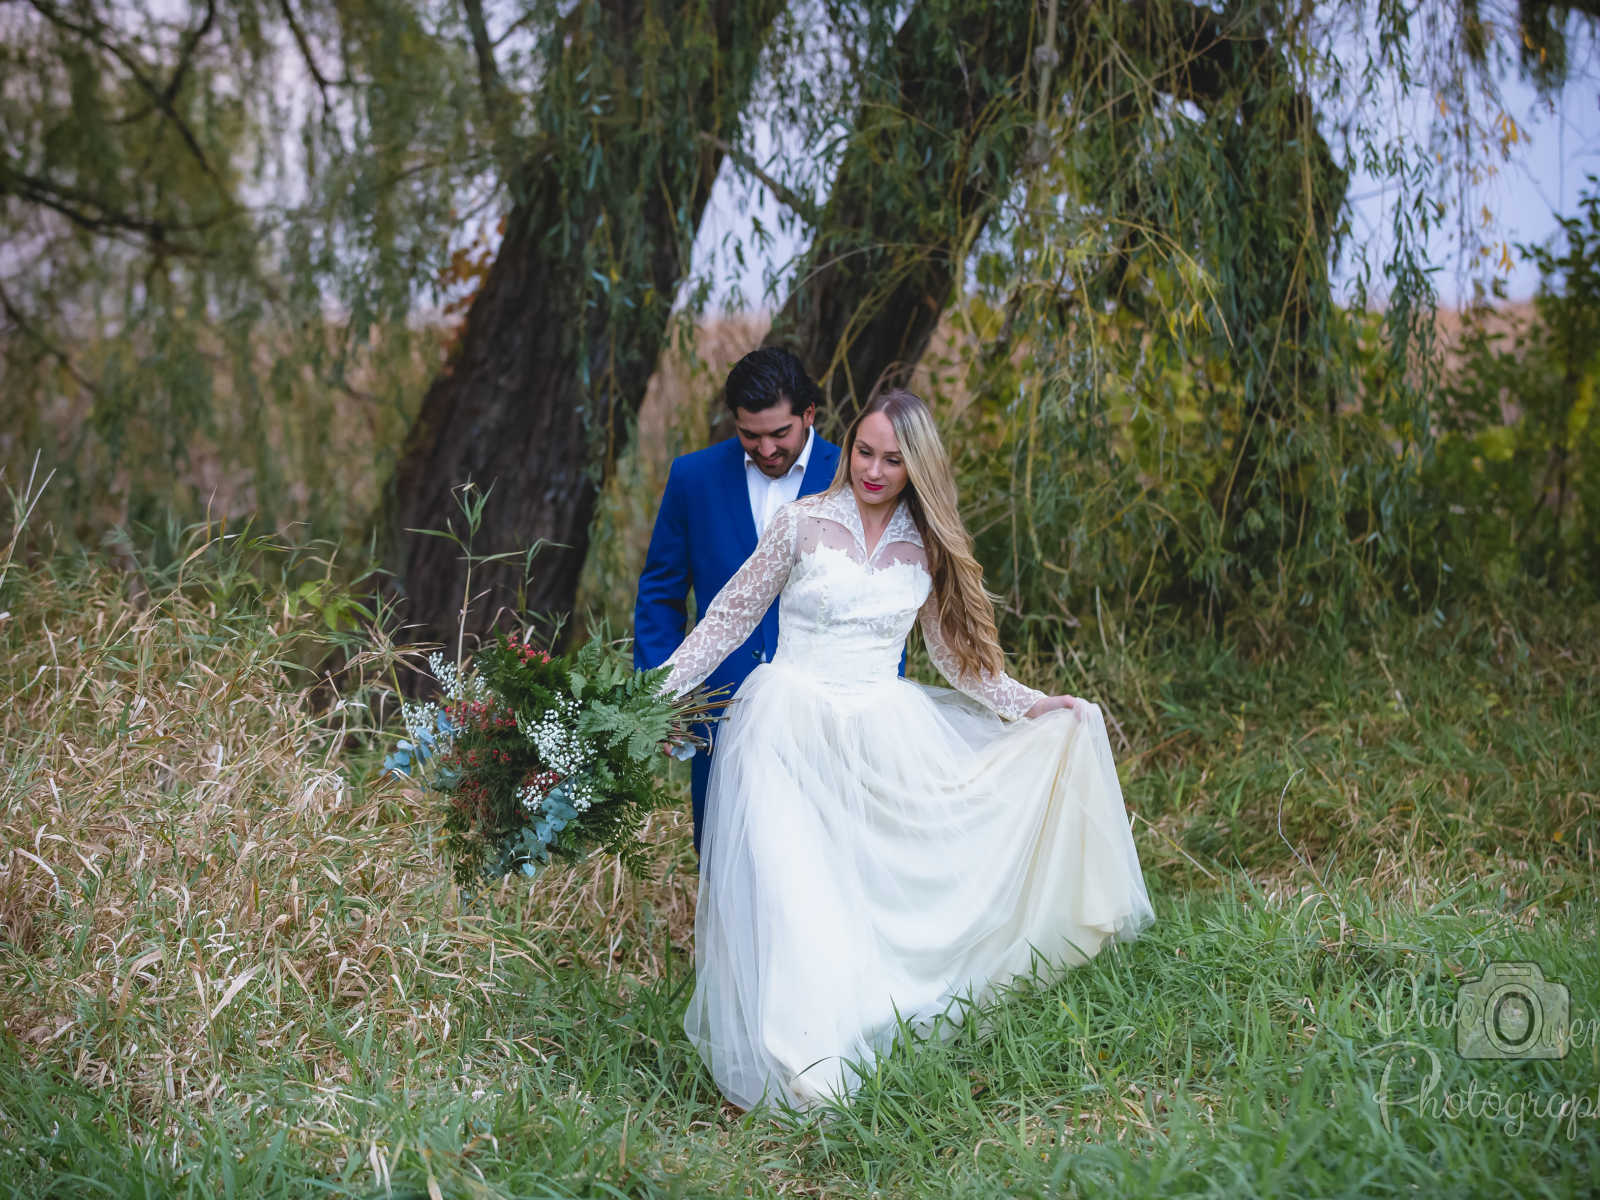 engaged couple in white dress and blue suit embrace in grass